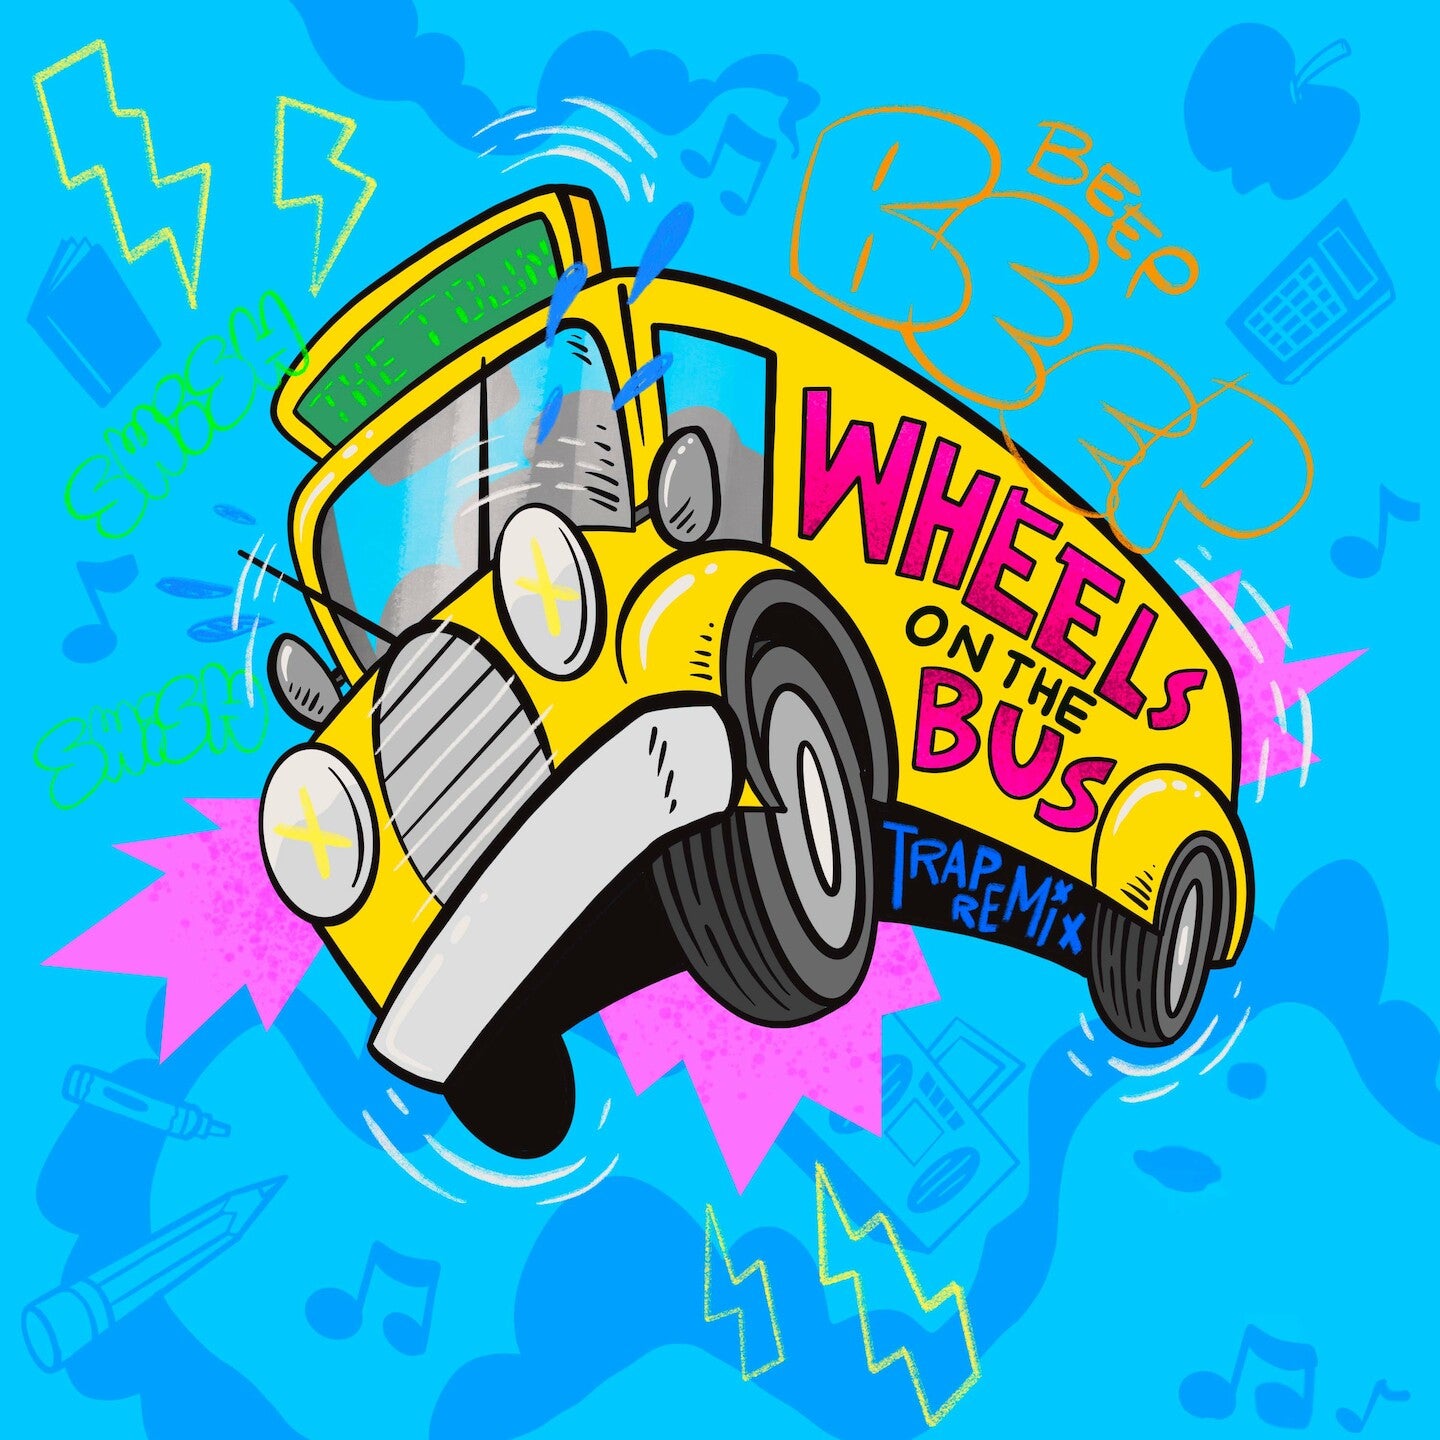 Wheels On The Bus Remix